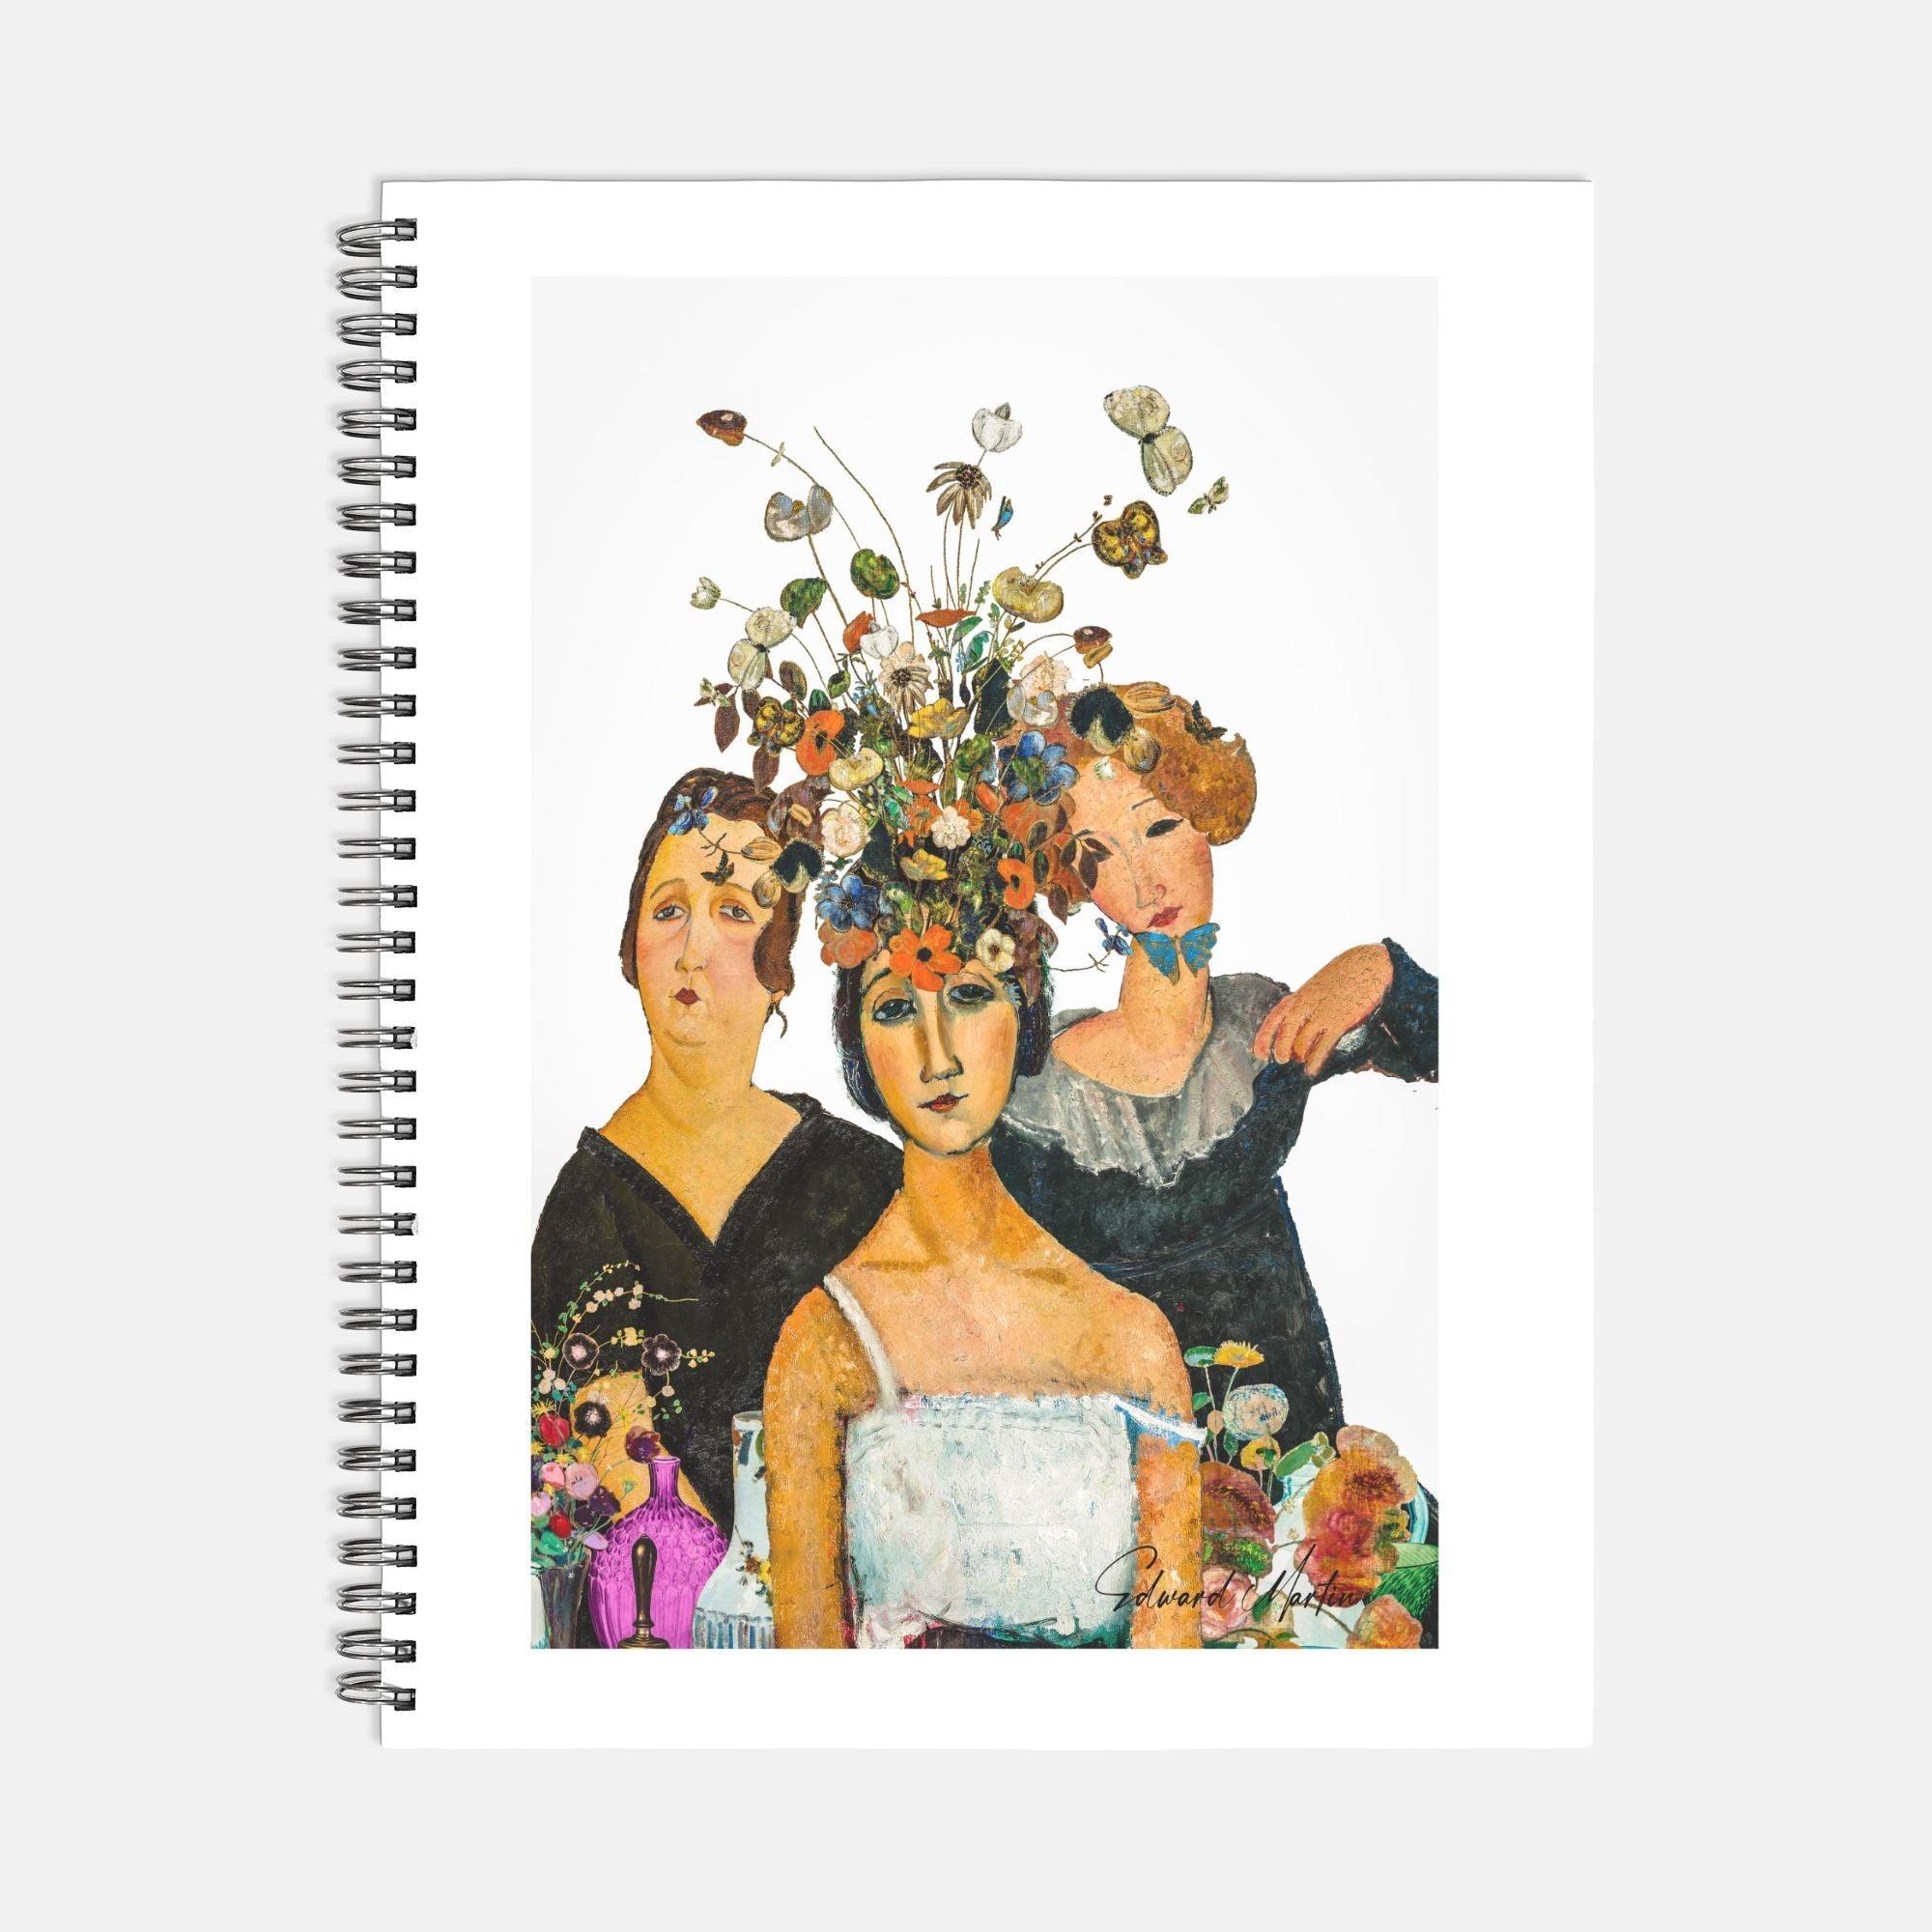 Notebook Hardcover Spiral 8.5 x 11-Almost Ready - Elementologie